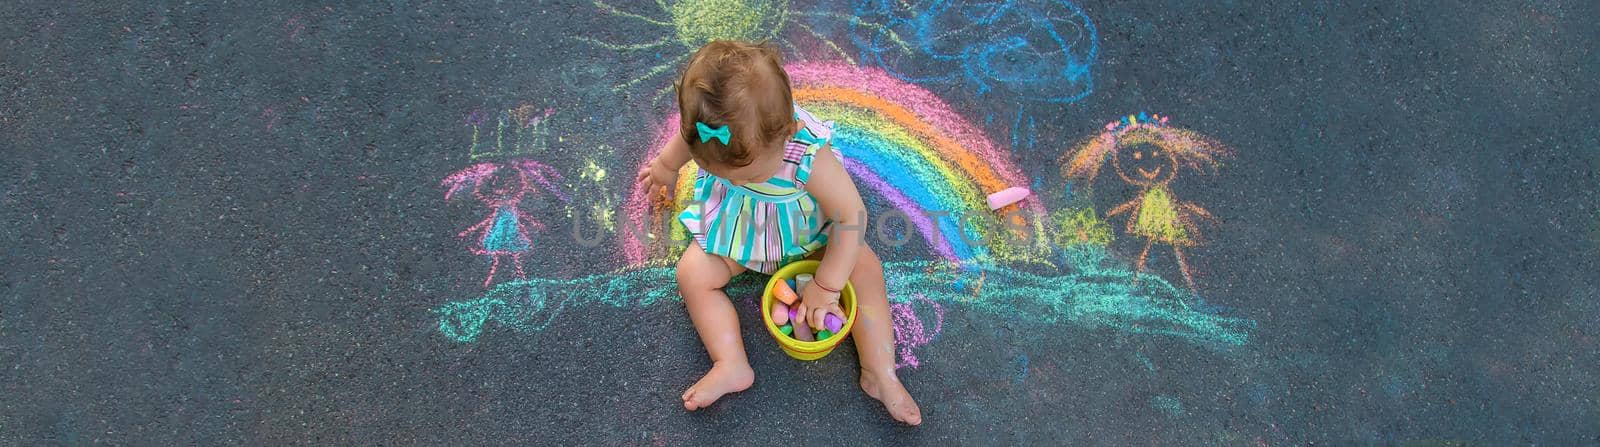 Baby draws a rainbow on the pavement with chalk. Selective focus. by yanadjana